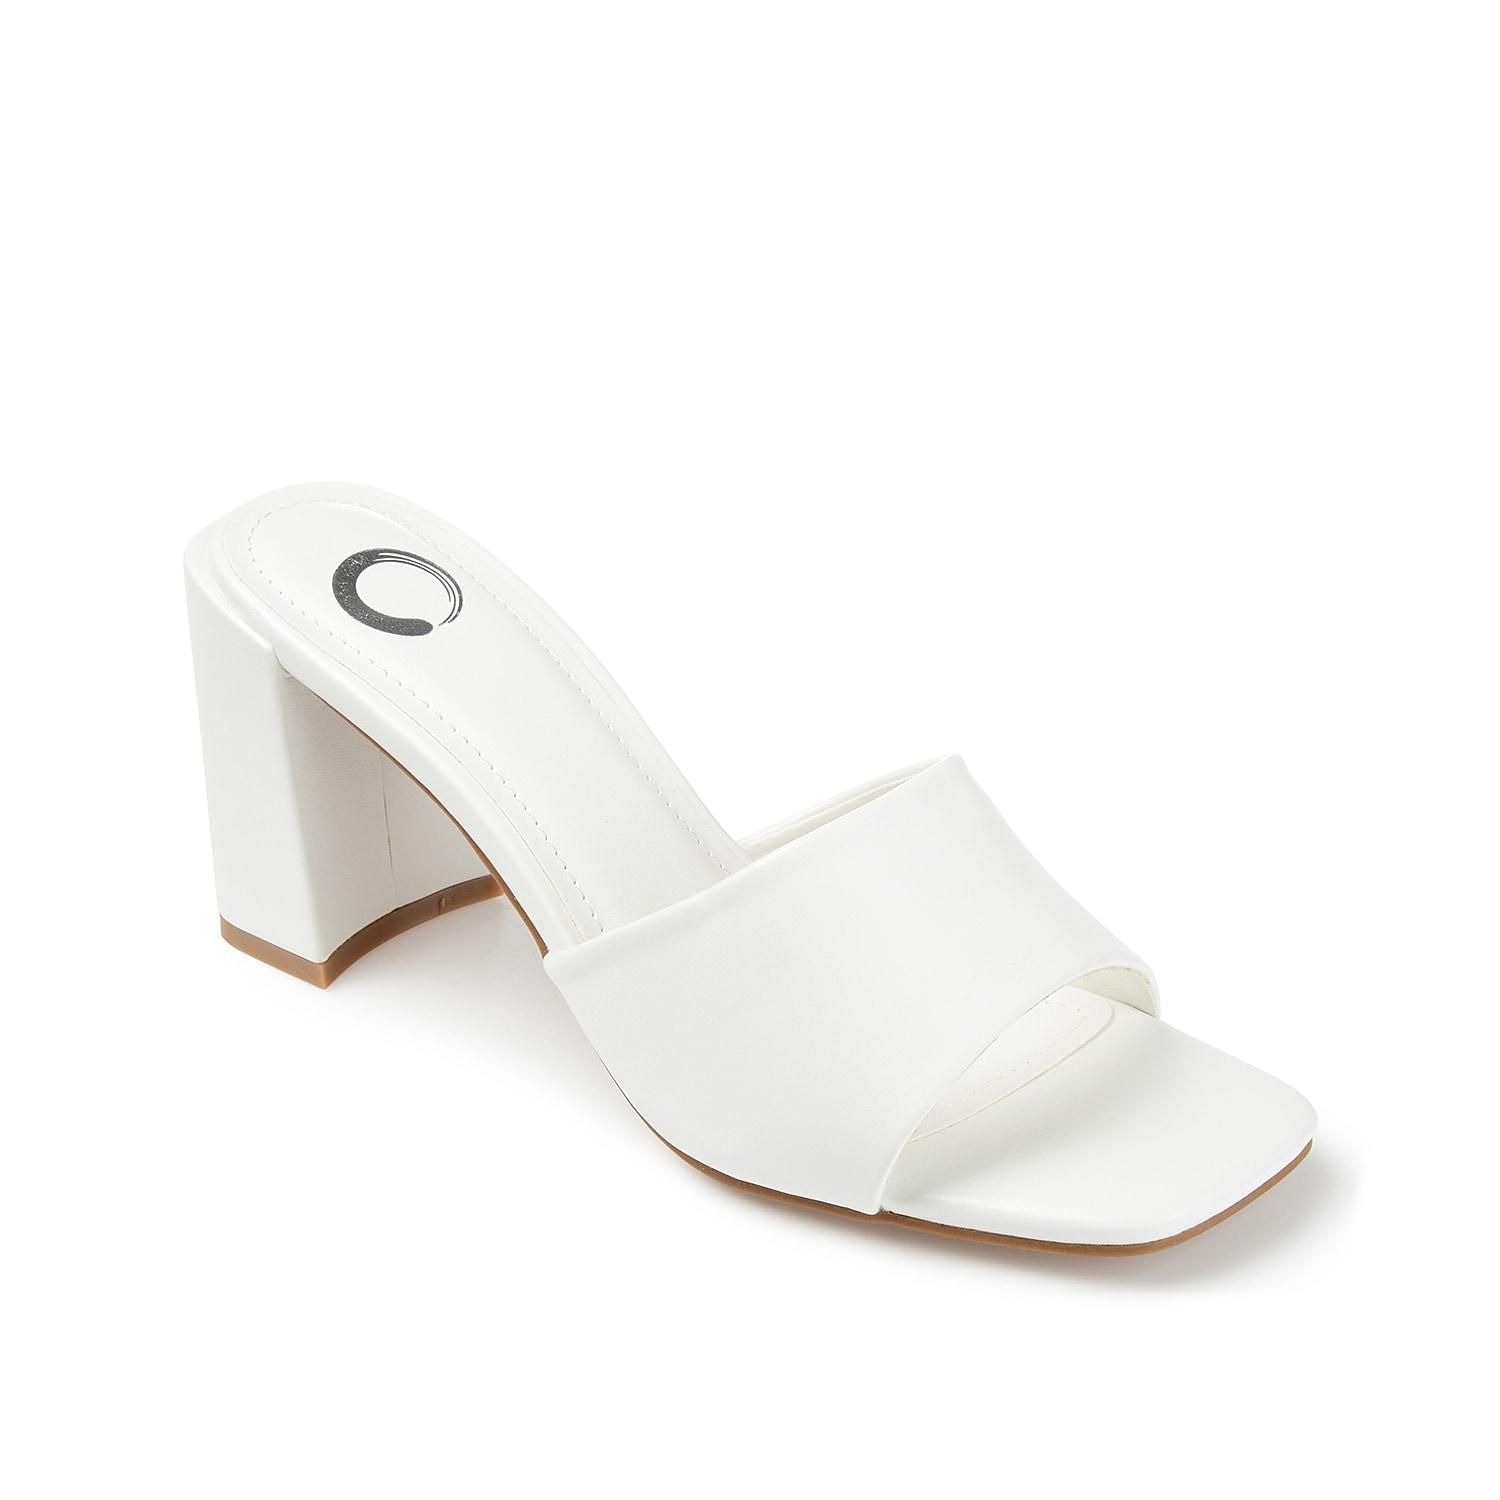 Journee Collection Womens Alisia Sandals Womens Shoes Product Image